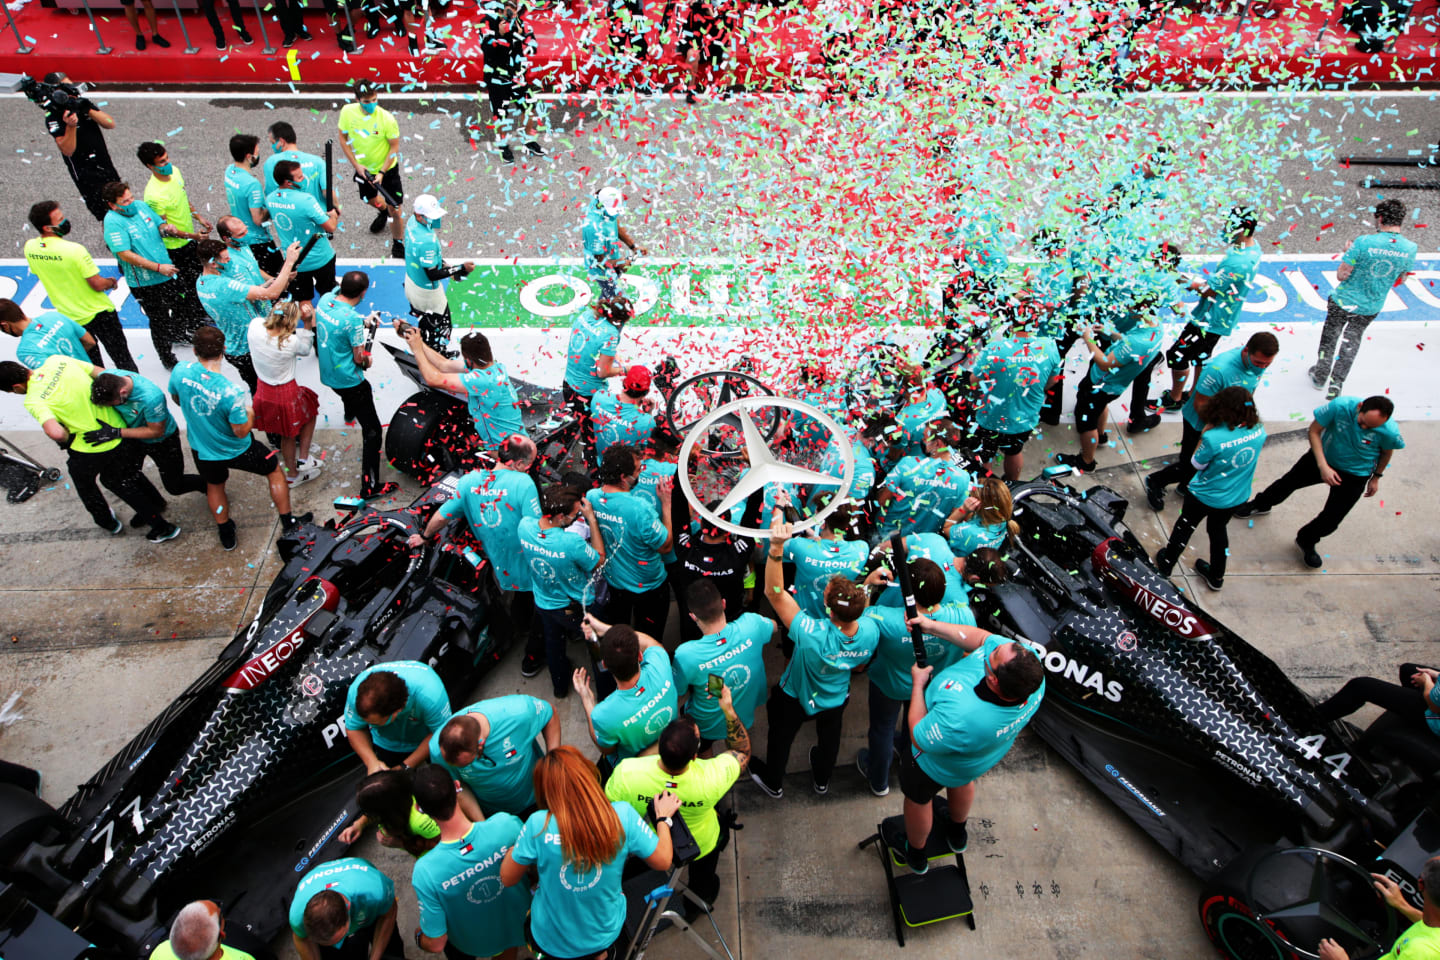 IMOLA, ITALY - NOVEMBER 01: The Mercedes GP team celebrate after winning a 7th consecutive F1 Constructors Championshop during the F1 Grand Prix of Emilia Romagna at Autodromo Enzo e Dino Ferrari on November 01, 2020 in Imola, Italy. (Photo by Peter Fox/Getty Images)